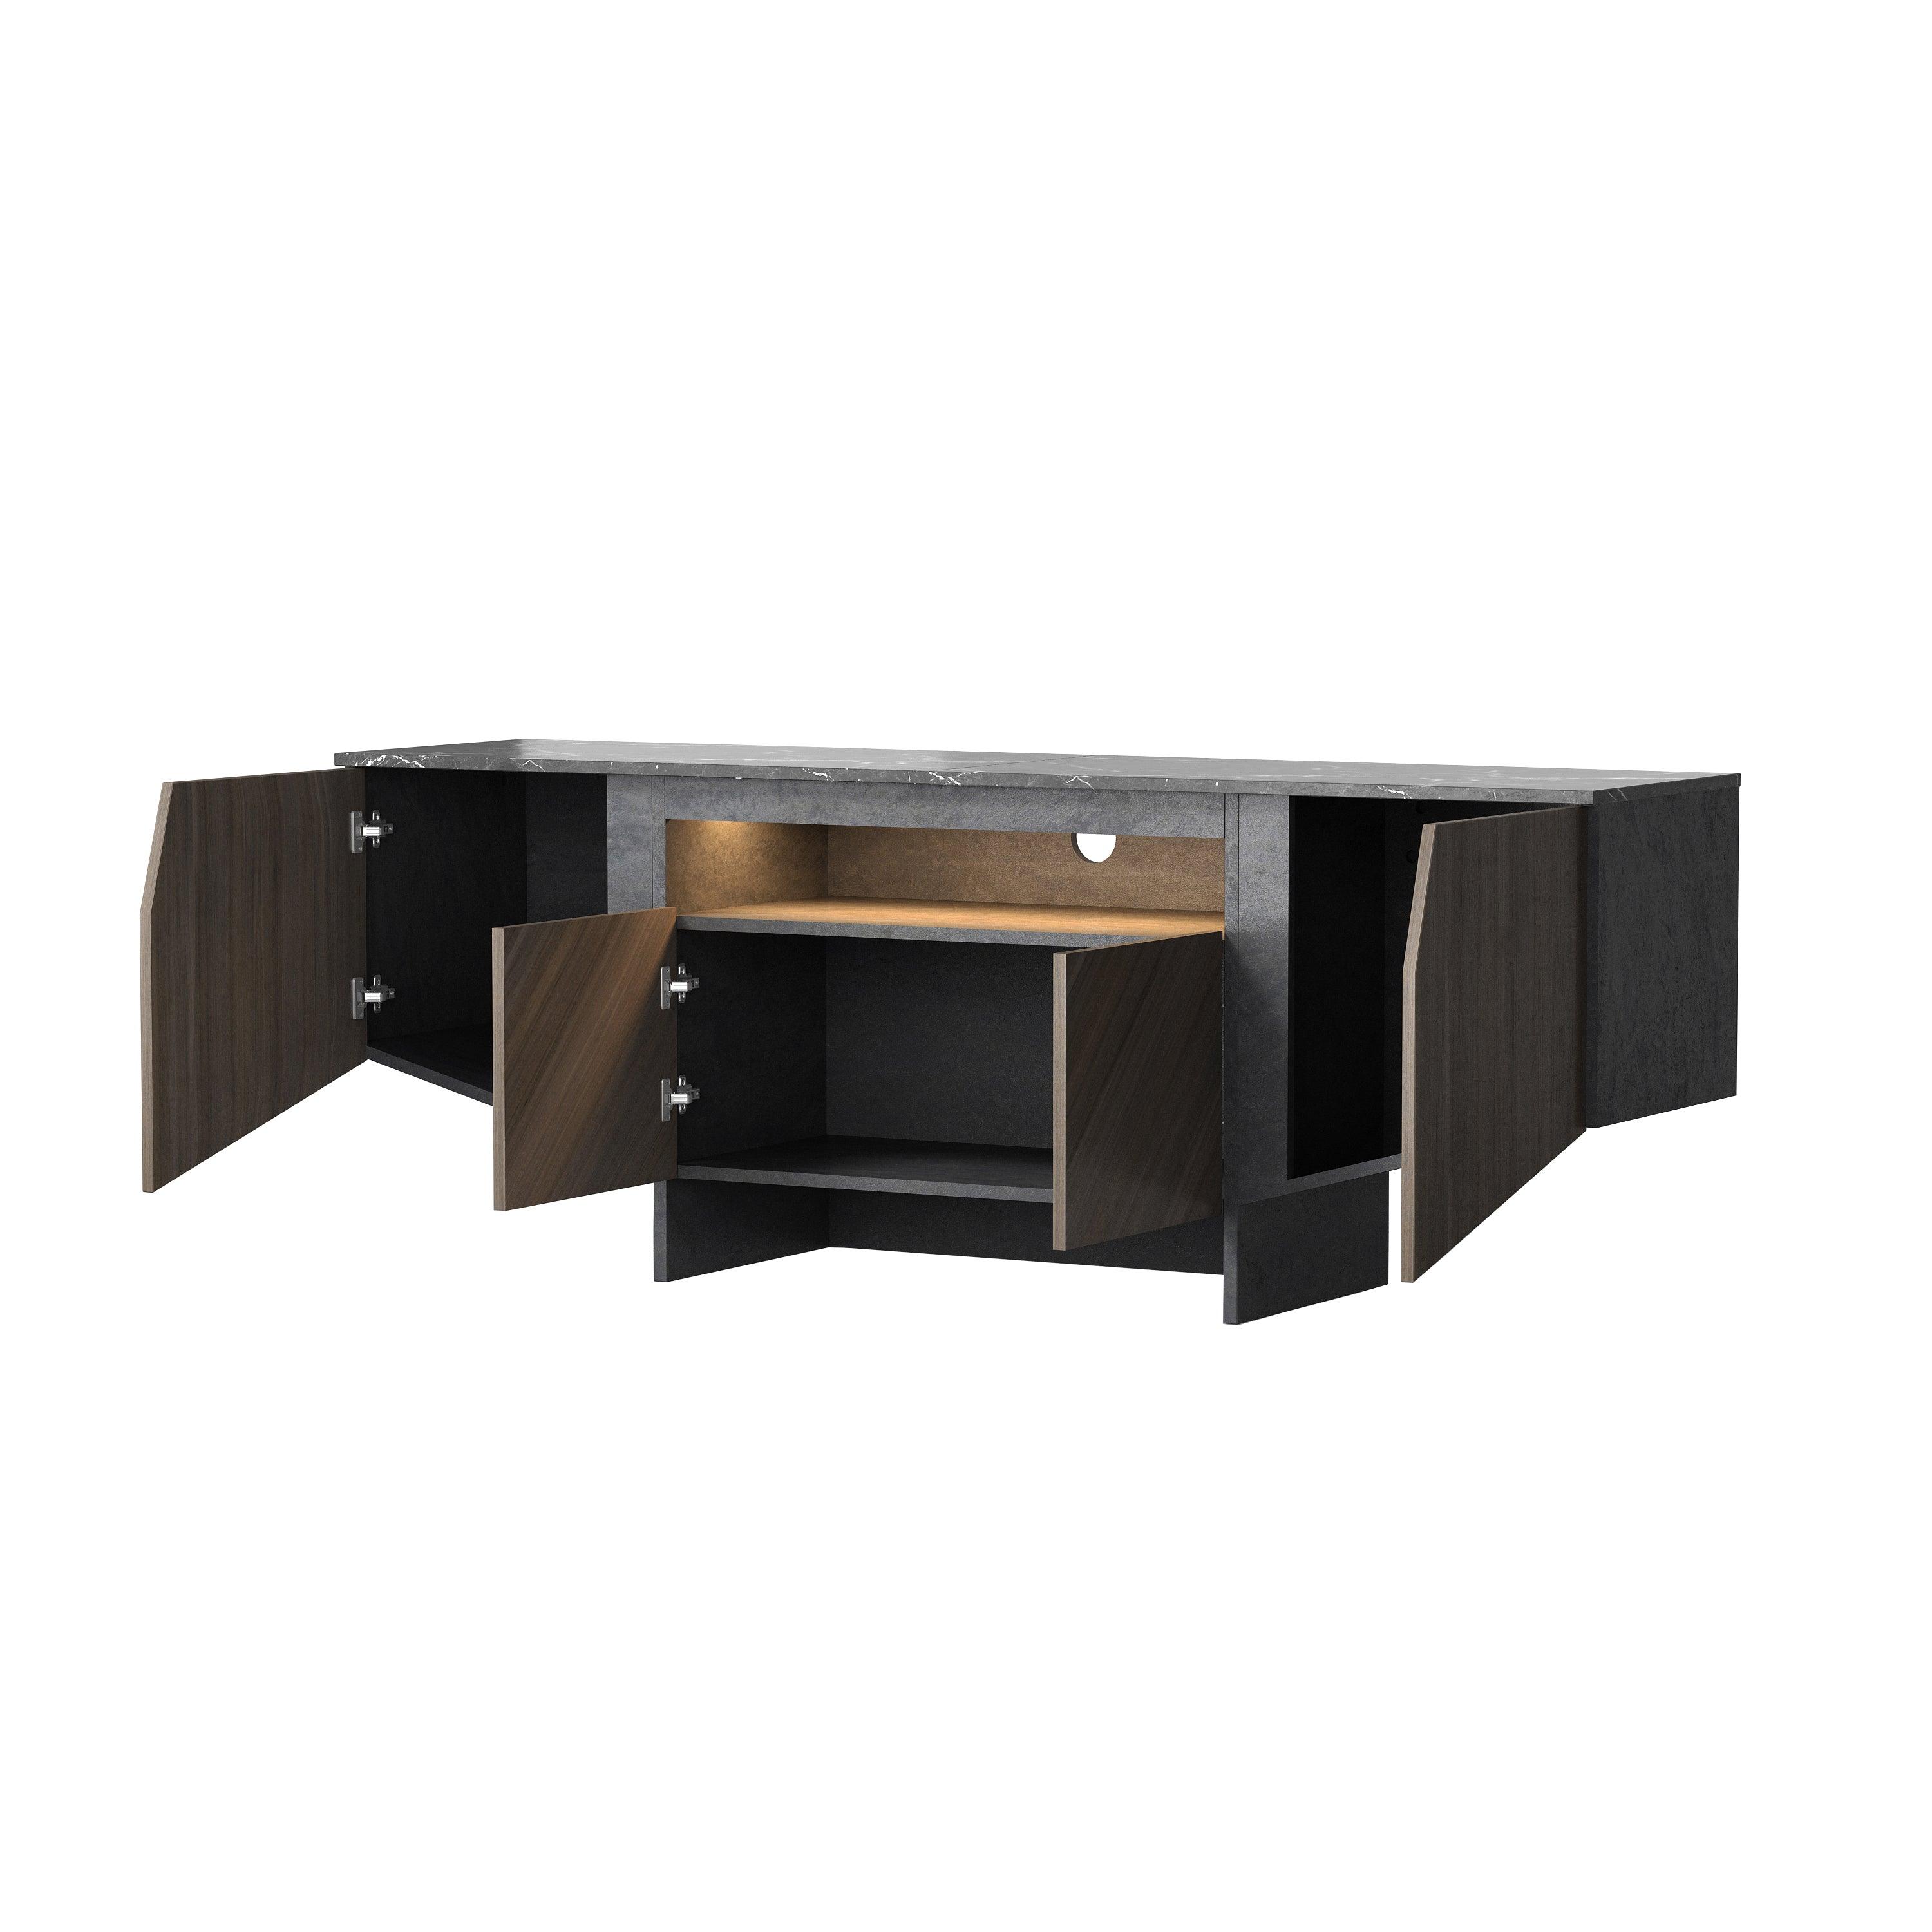 63 Inch TV Stand with LED Lights, with Storage Cabinet and Shelves, TV Console Table Entertainment Center for Living Room, Bedroom LamCham